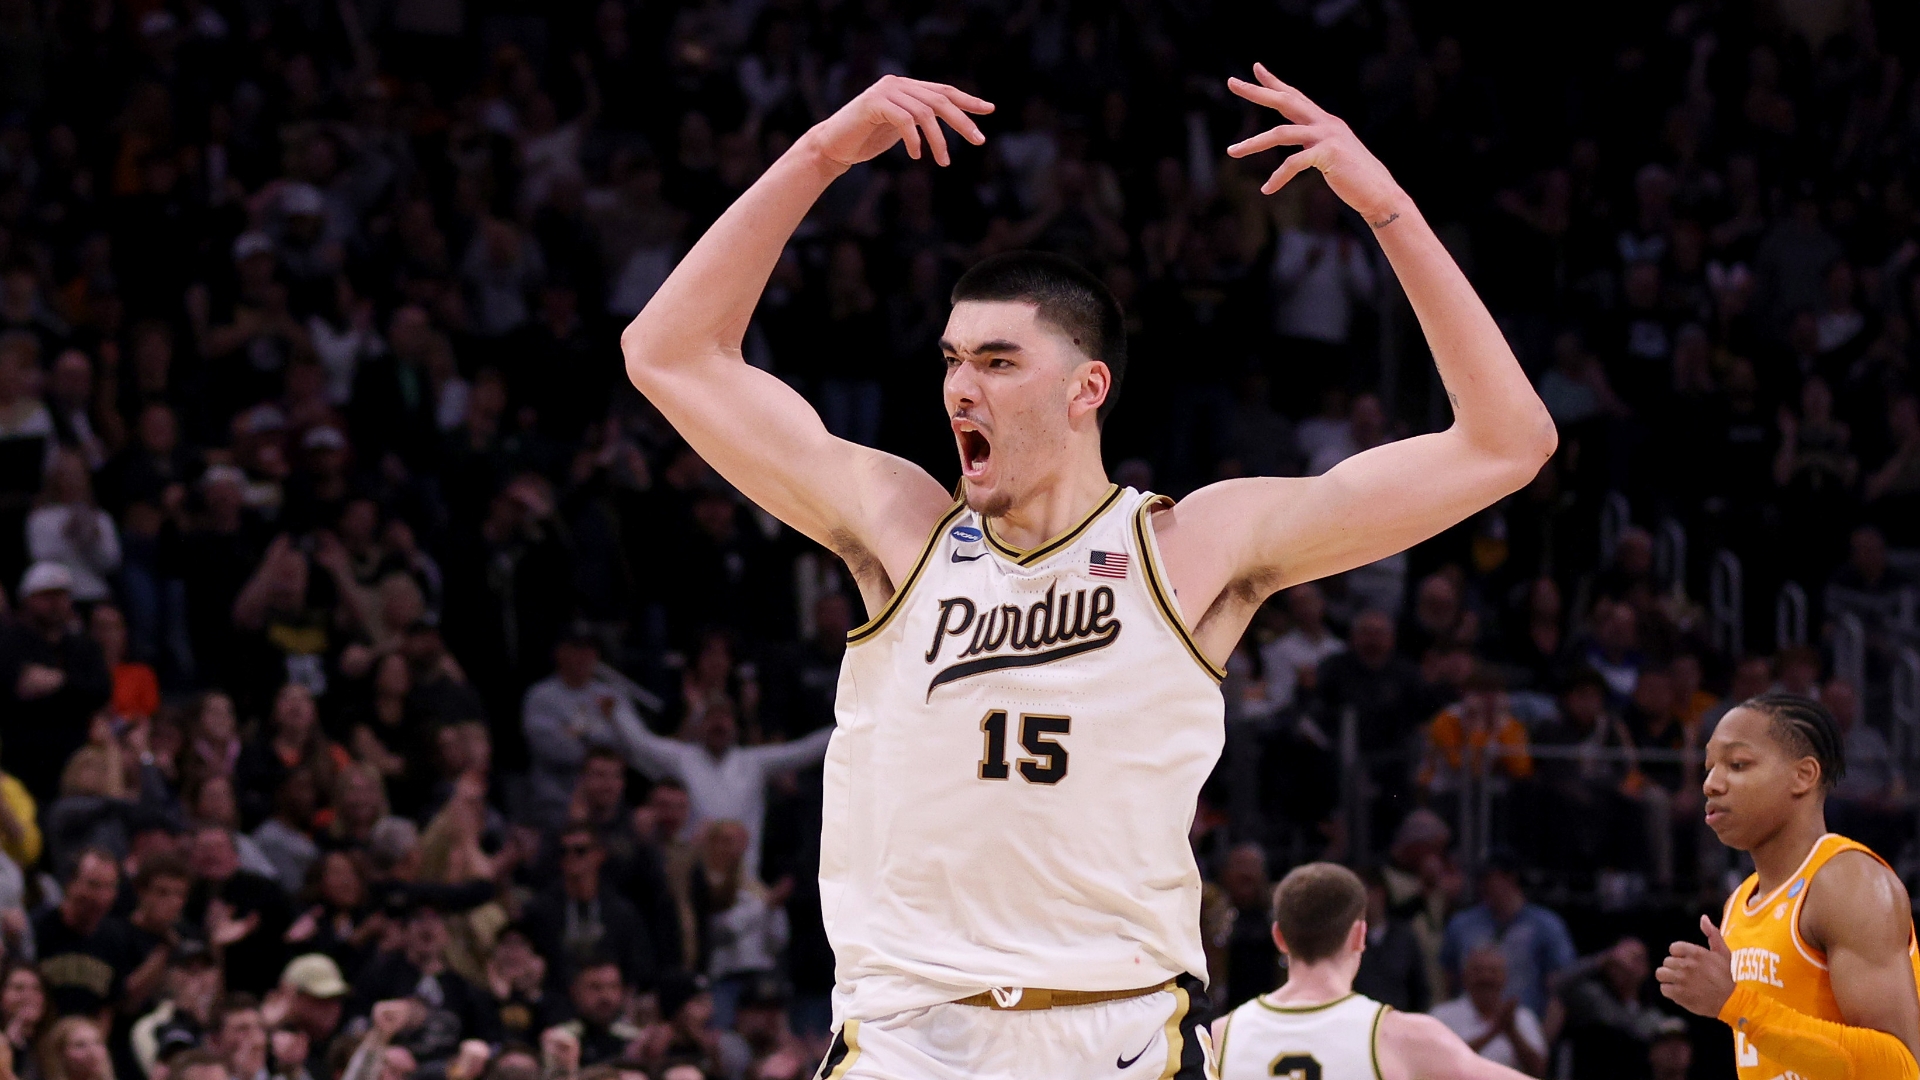 Zach Edey's 14 straight points boost Purdue to the Final Four